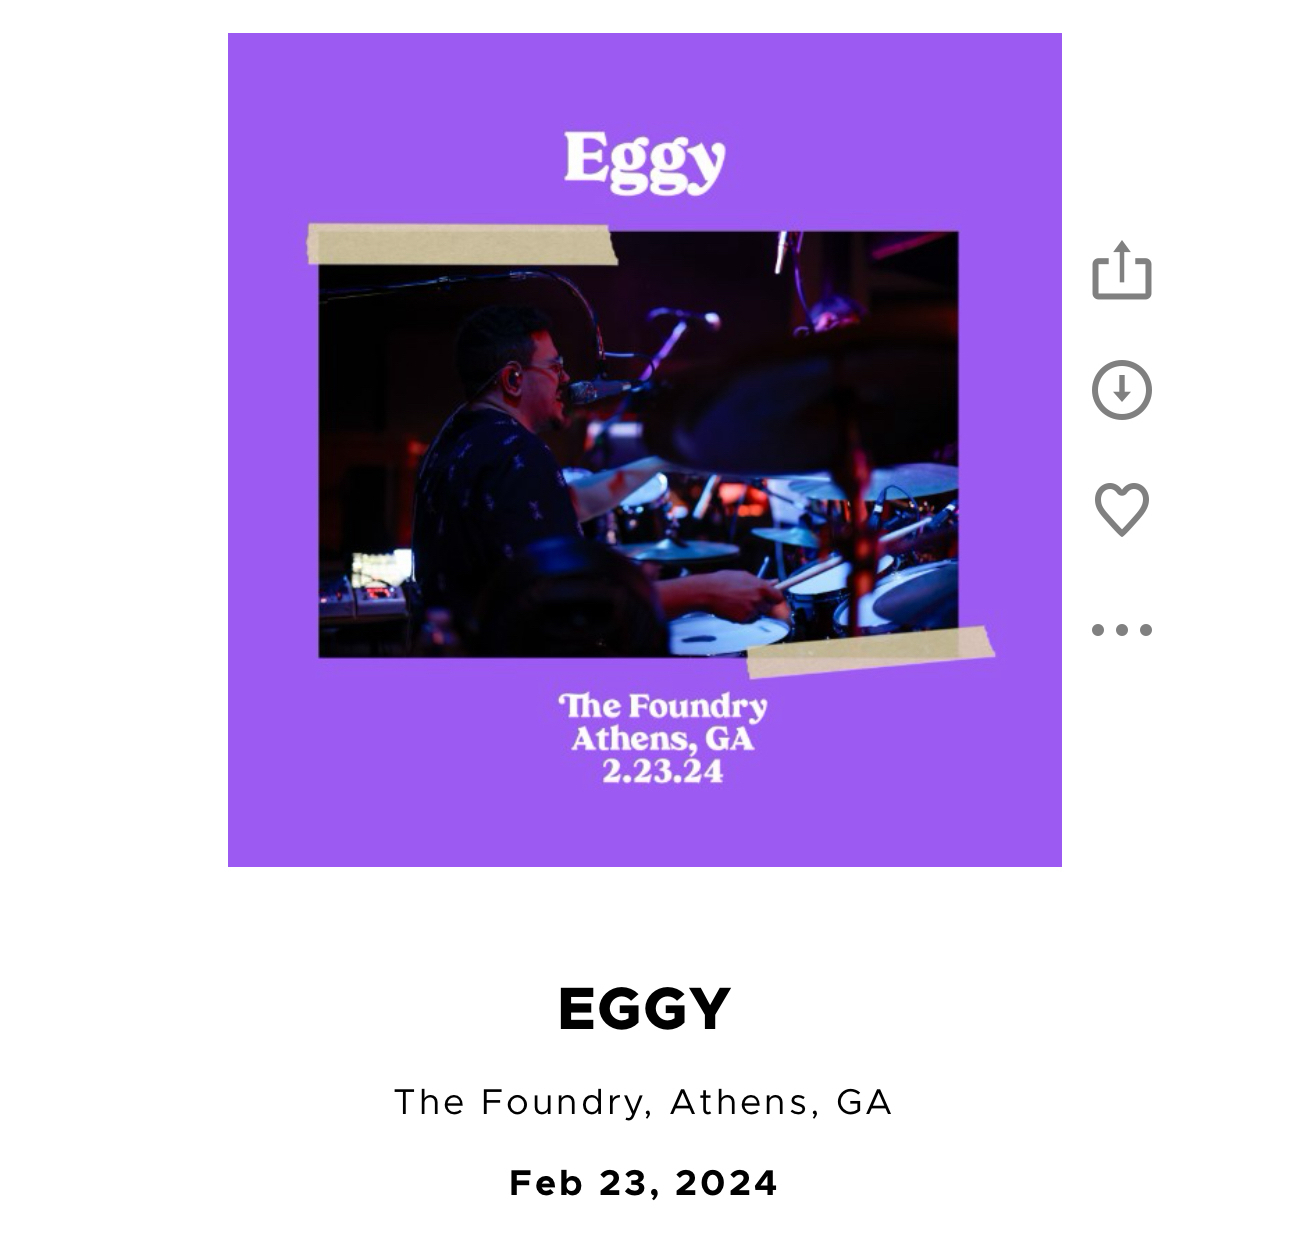 A promotional graphic for the band ‘Eggy’ featuring a performance photo with a purple color theme, indicating a concert at The Foundry in Athens, GA on February 23, 2024.